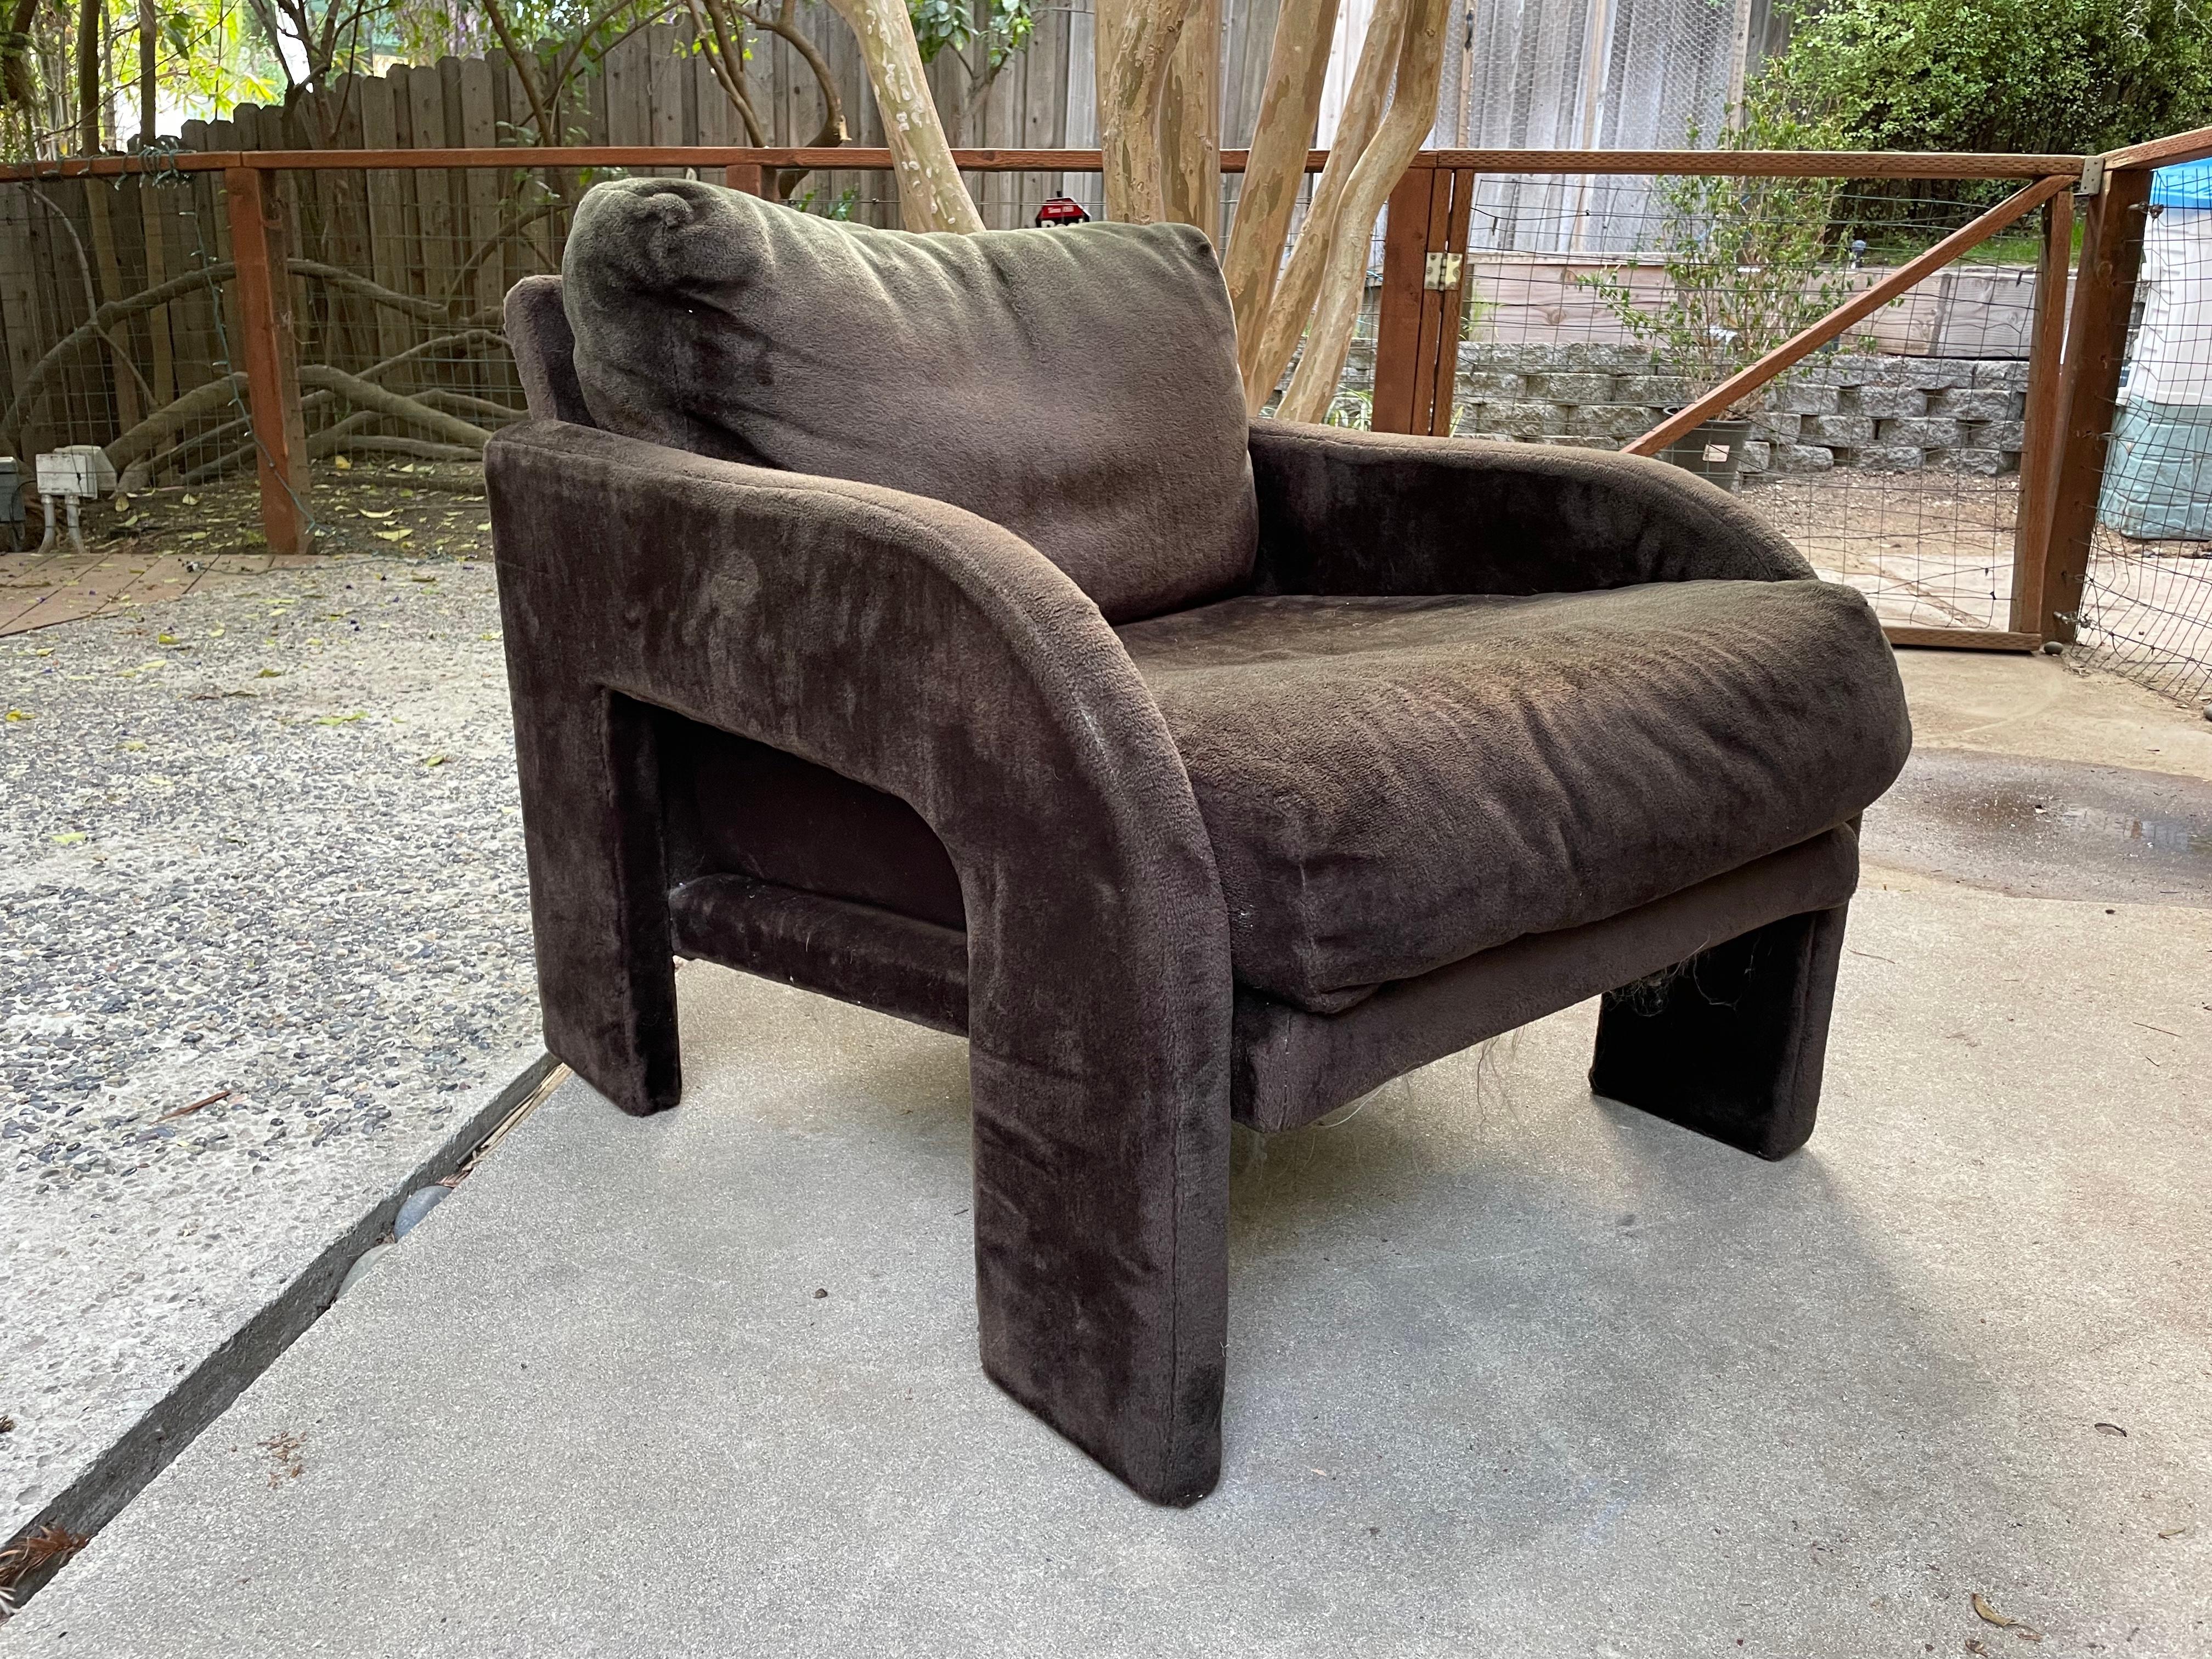 Sculptural lounge chair designed by Adrian Pearsall for Comfort Designs in the 1970s. This piece has two cushions in original soft brushed brown velvet. Super comfortable. USA, 1970s. Great lines on this chair. 

Very good original condition. The